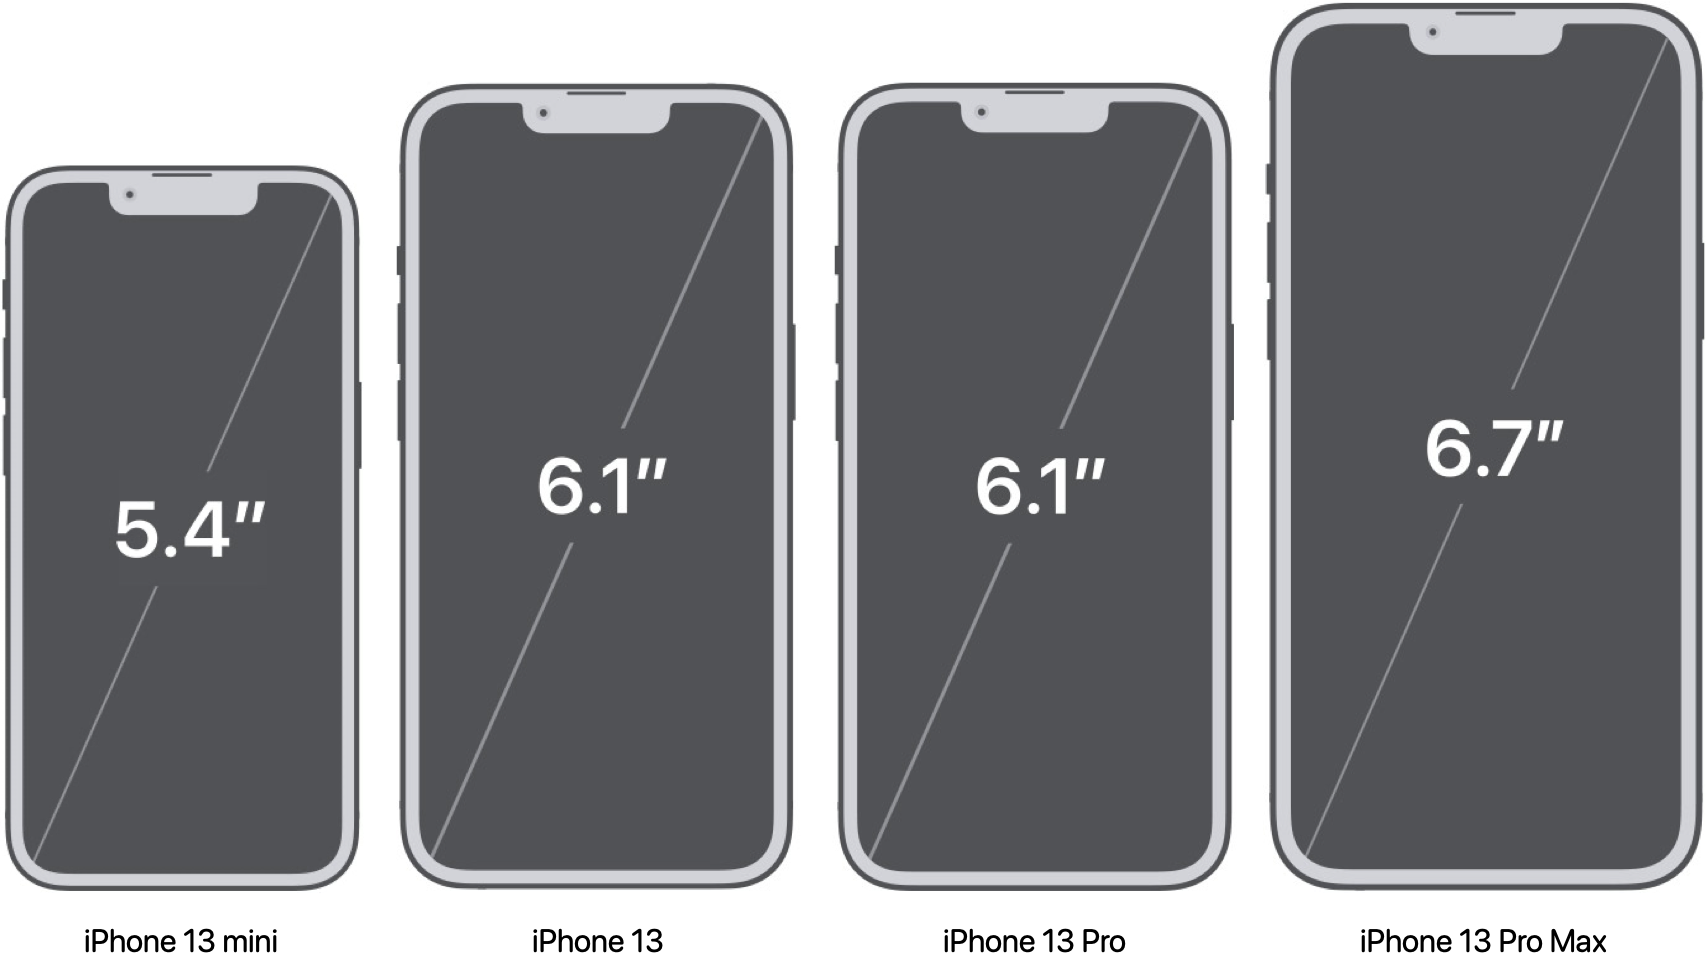 Downtown klar laver mad iPhone 13 Screen Sizes